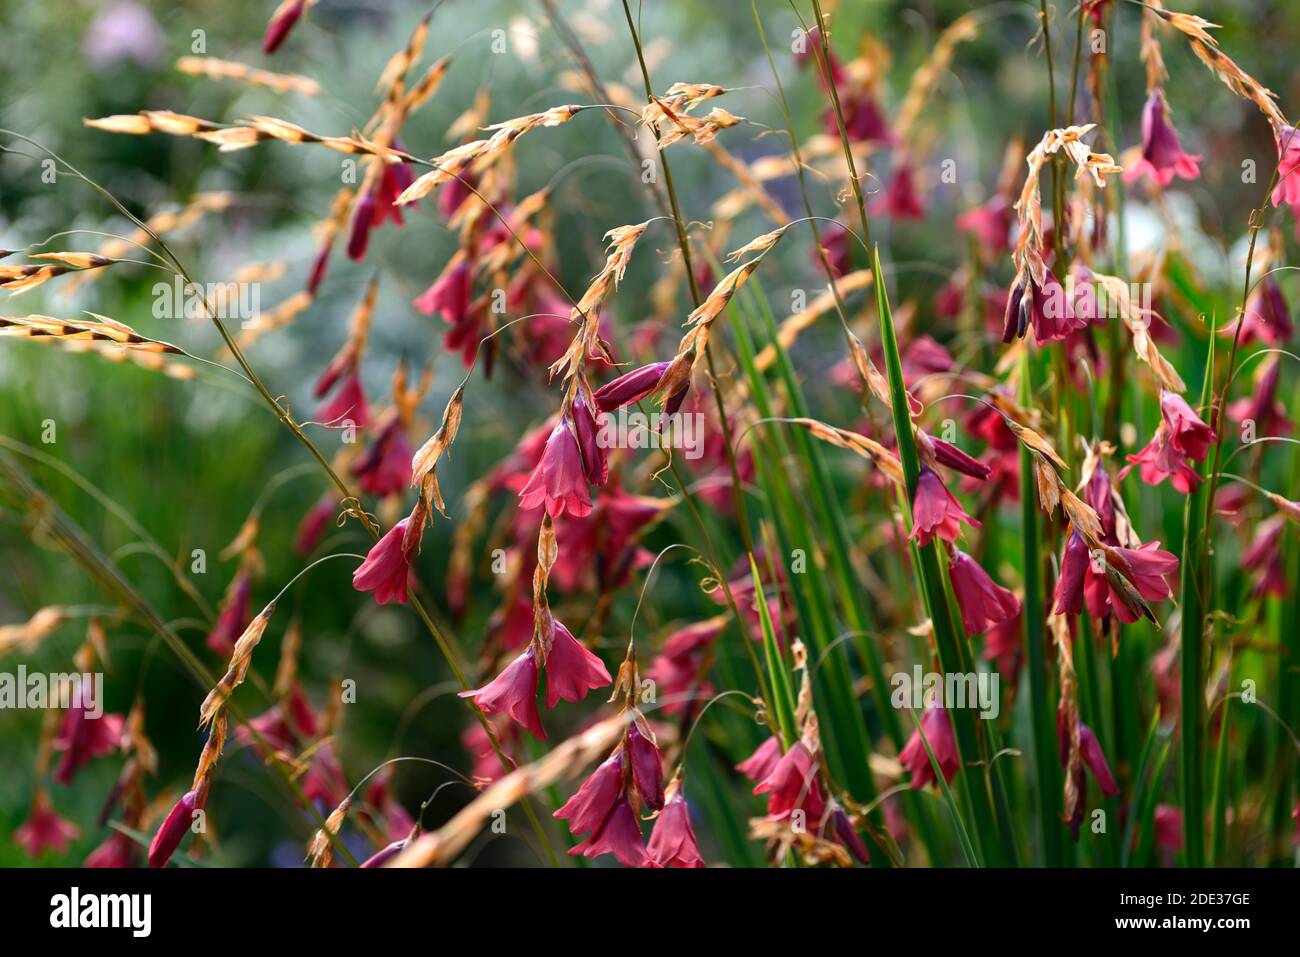 dierama igneum,pink coral flowers,perennials,arching,dangling,hanging,bell shaped flower,angels fishing rods,perennial,perennials,RM Floral Stock Photo